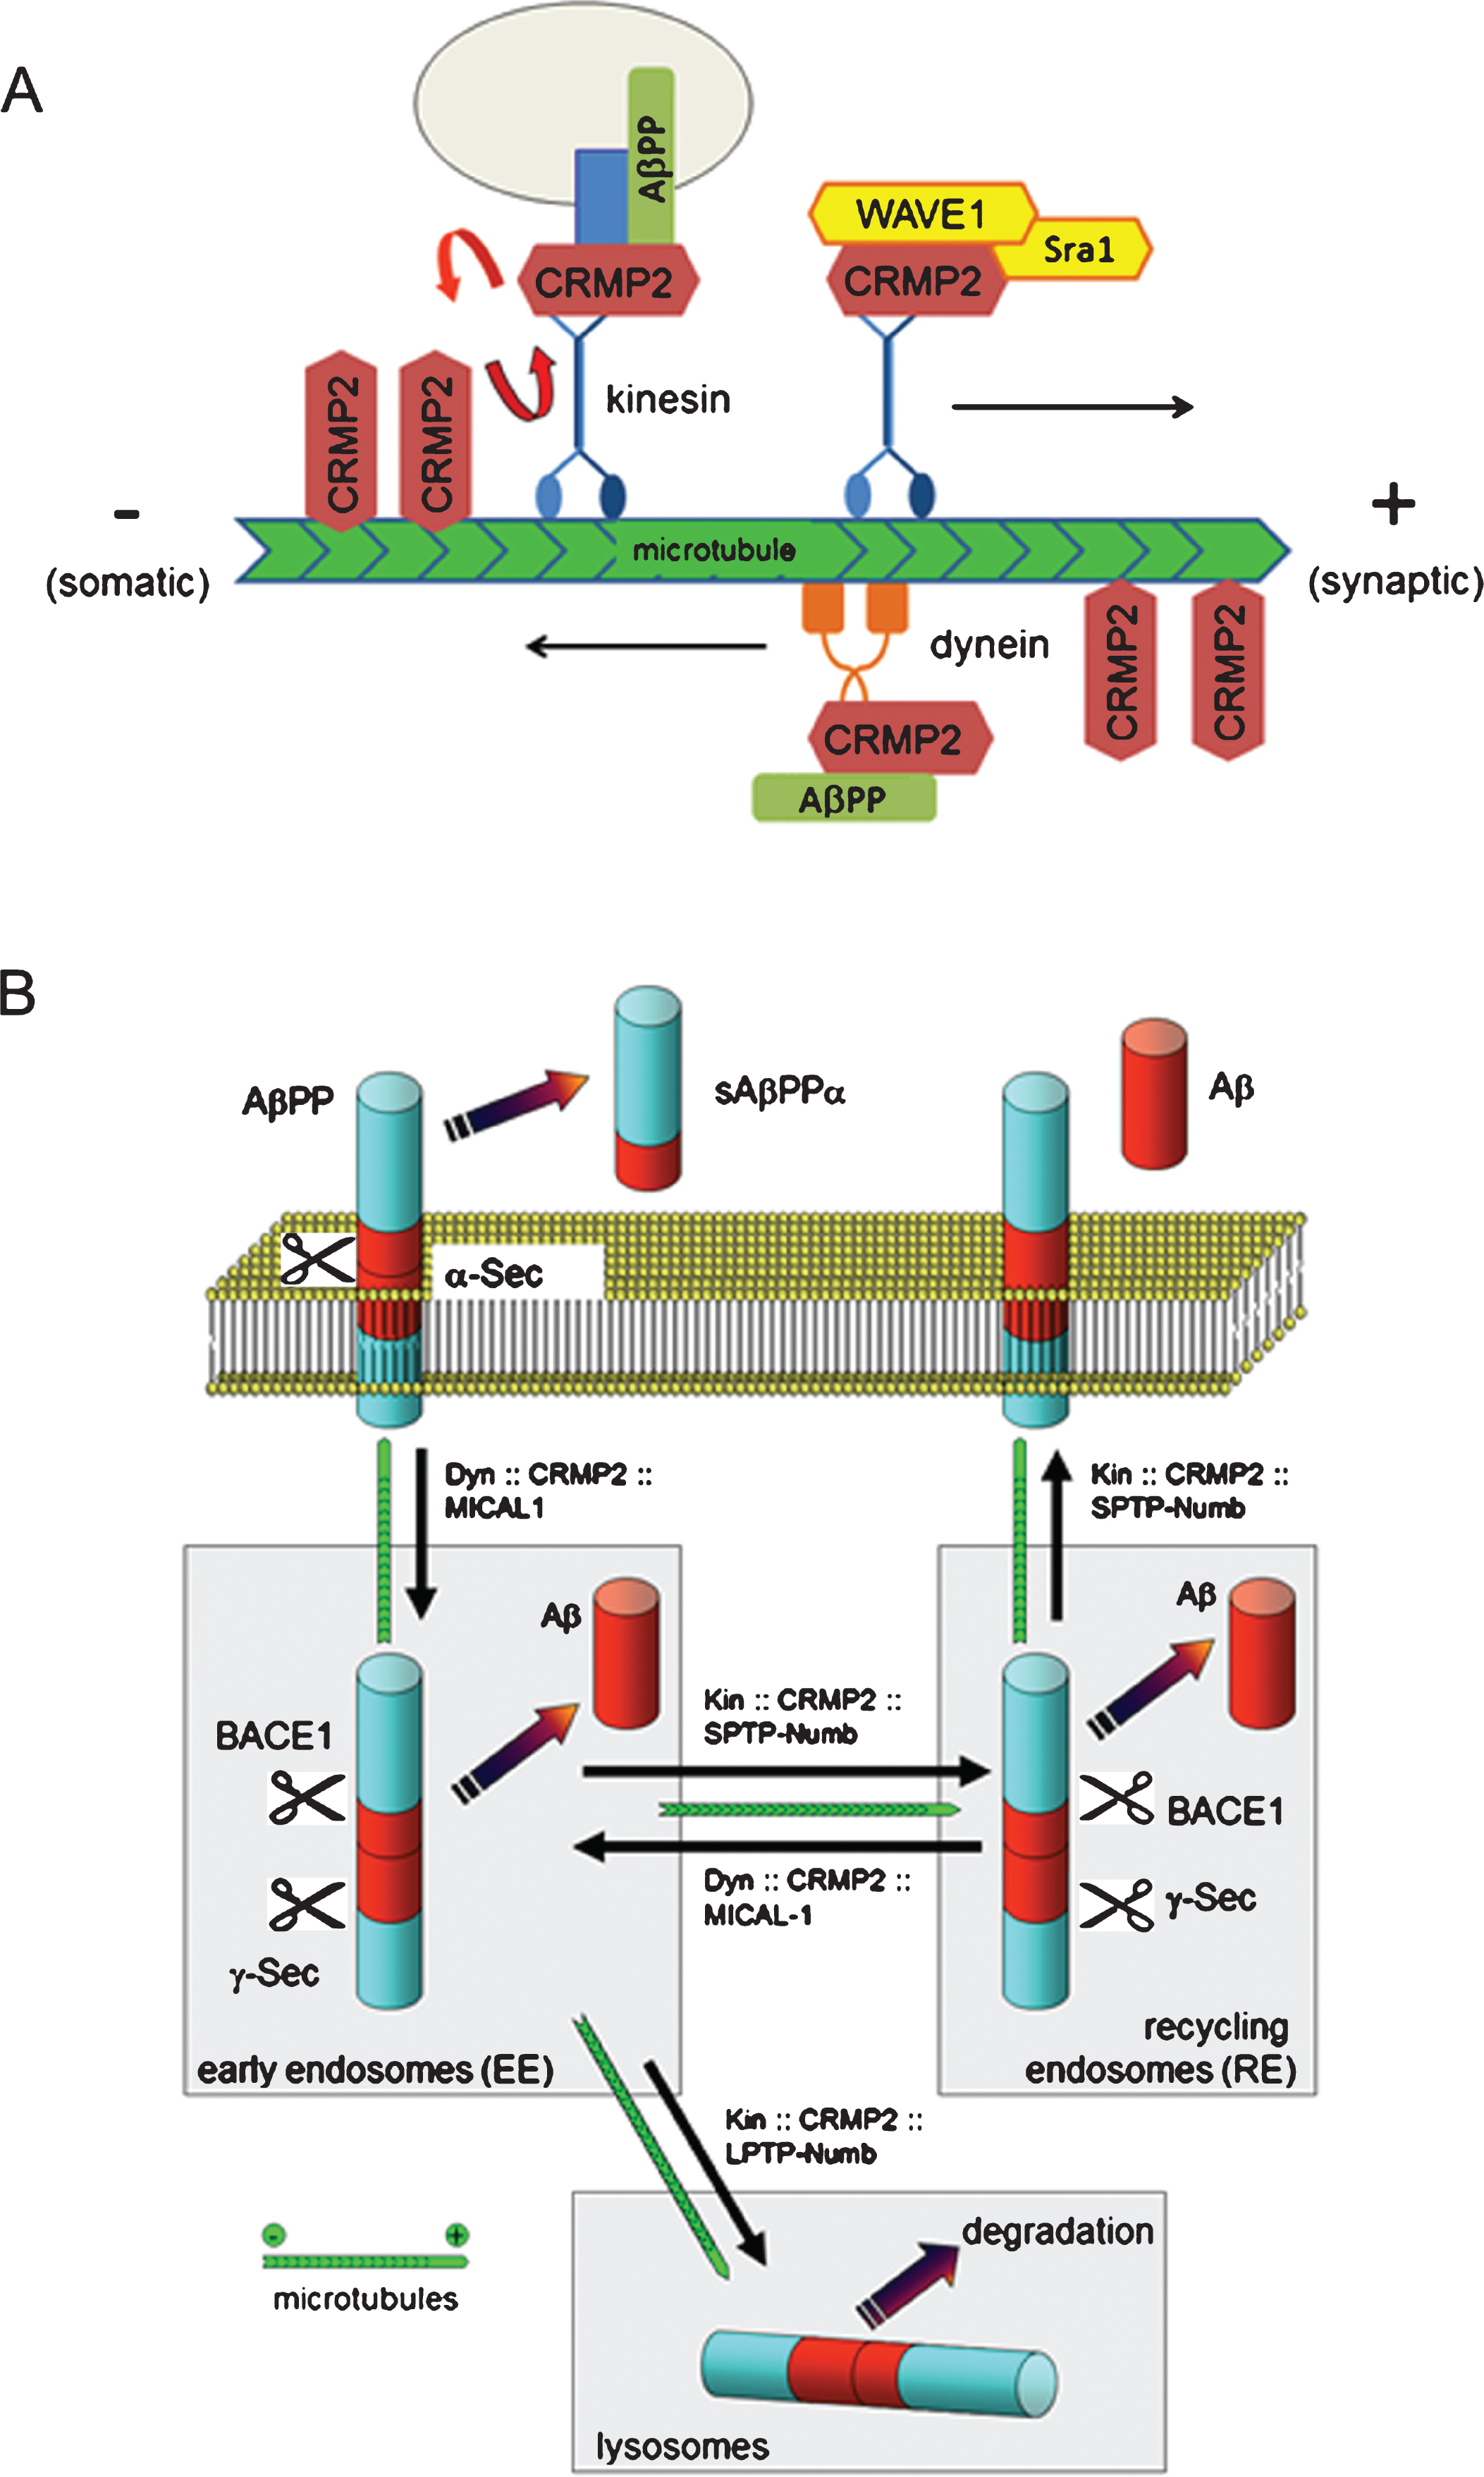 CRMP2 is a MAP that also interacts with cargo adaptor proteins involved with receptor endocytosis and intracellular vesicle trafficking. Panel A is a conceptual diagram illustrating known interactions of CRMP2 with microtubules, and also with kinesin and dynein-associated adaptor proteins. In this model, CRMP2 dynamically equilibrates among its binding partners in a fashion that is likely dependent upon CRMP2 isoform and post-translational modifications. Panel B illustrates AβPP trafficking in a manner that highlights points at which CRMP2 and its binding partners, Numb and MICAL-L1, are involved with intracellular vesicle movements. It is speculated that CRMP2 becomes functionally depleted in AD, by a combination of hyperphosphorylation; sequestration into nascent neurofibrillary tangles; and by oxidative post-translational modifications. This would impede multiple CRMP2 dependent processes including AβPP trafficking through early and recycling endosomal compartments. Additionally, the author and his colleagues find that shRNA suppression of CRMP2 impedes autophagy flux [50], possibly suggesting a role for CRMP2 in the efficient traffic of LC3-II containing autophagic vesicles. Thus functional depletion of CRMP2 could contribute to multiple aspects of AD neuropathology.